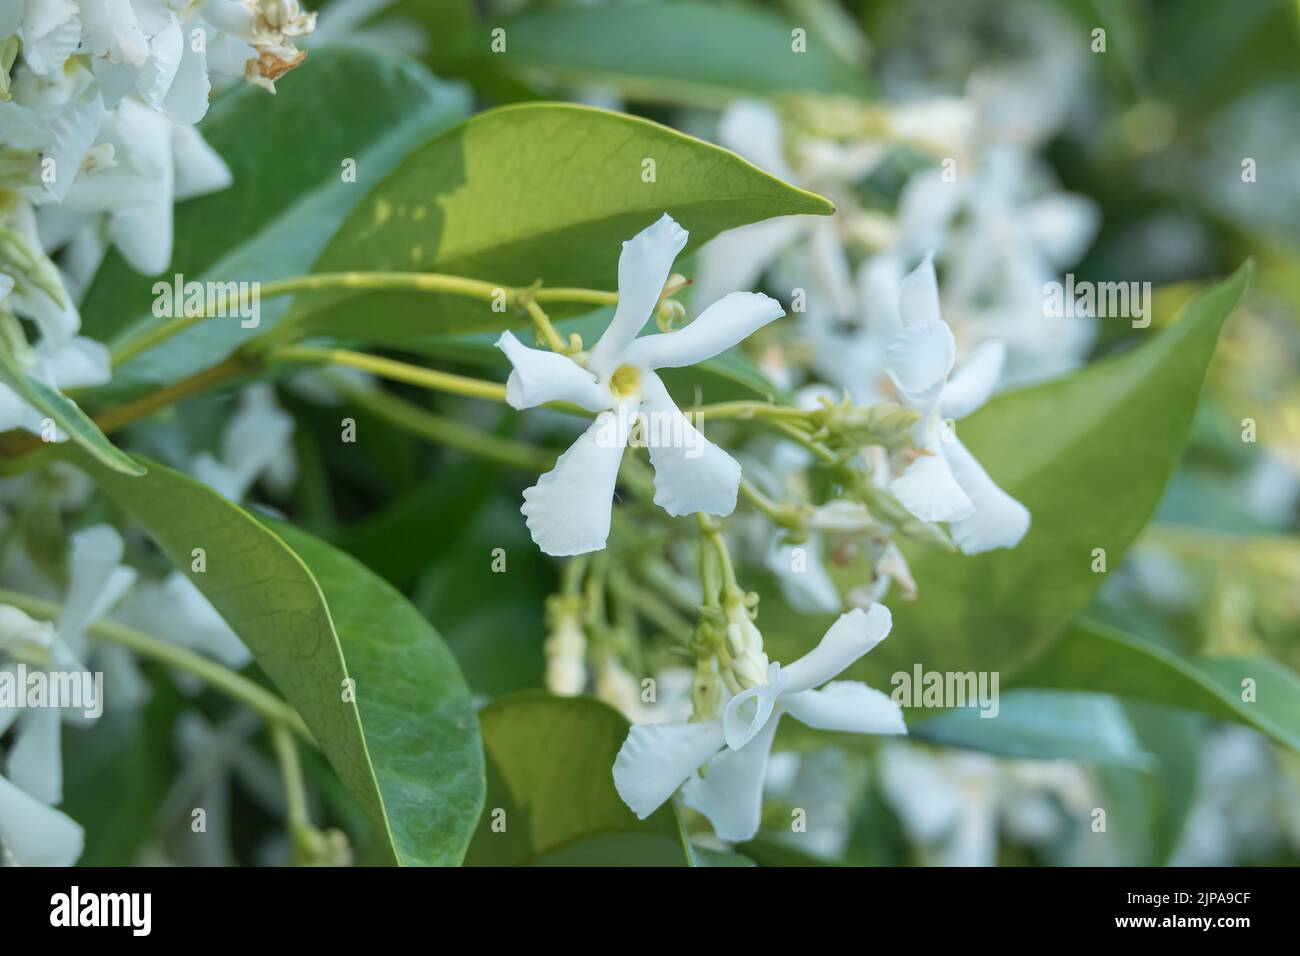 star jasmine flower seen up close outdoors blooming in summer Stock Photo